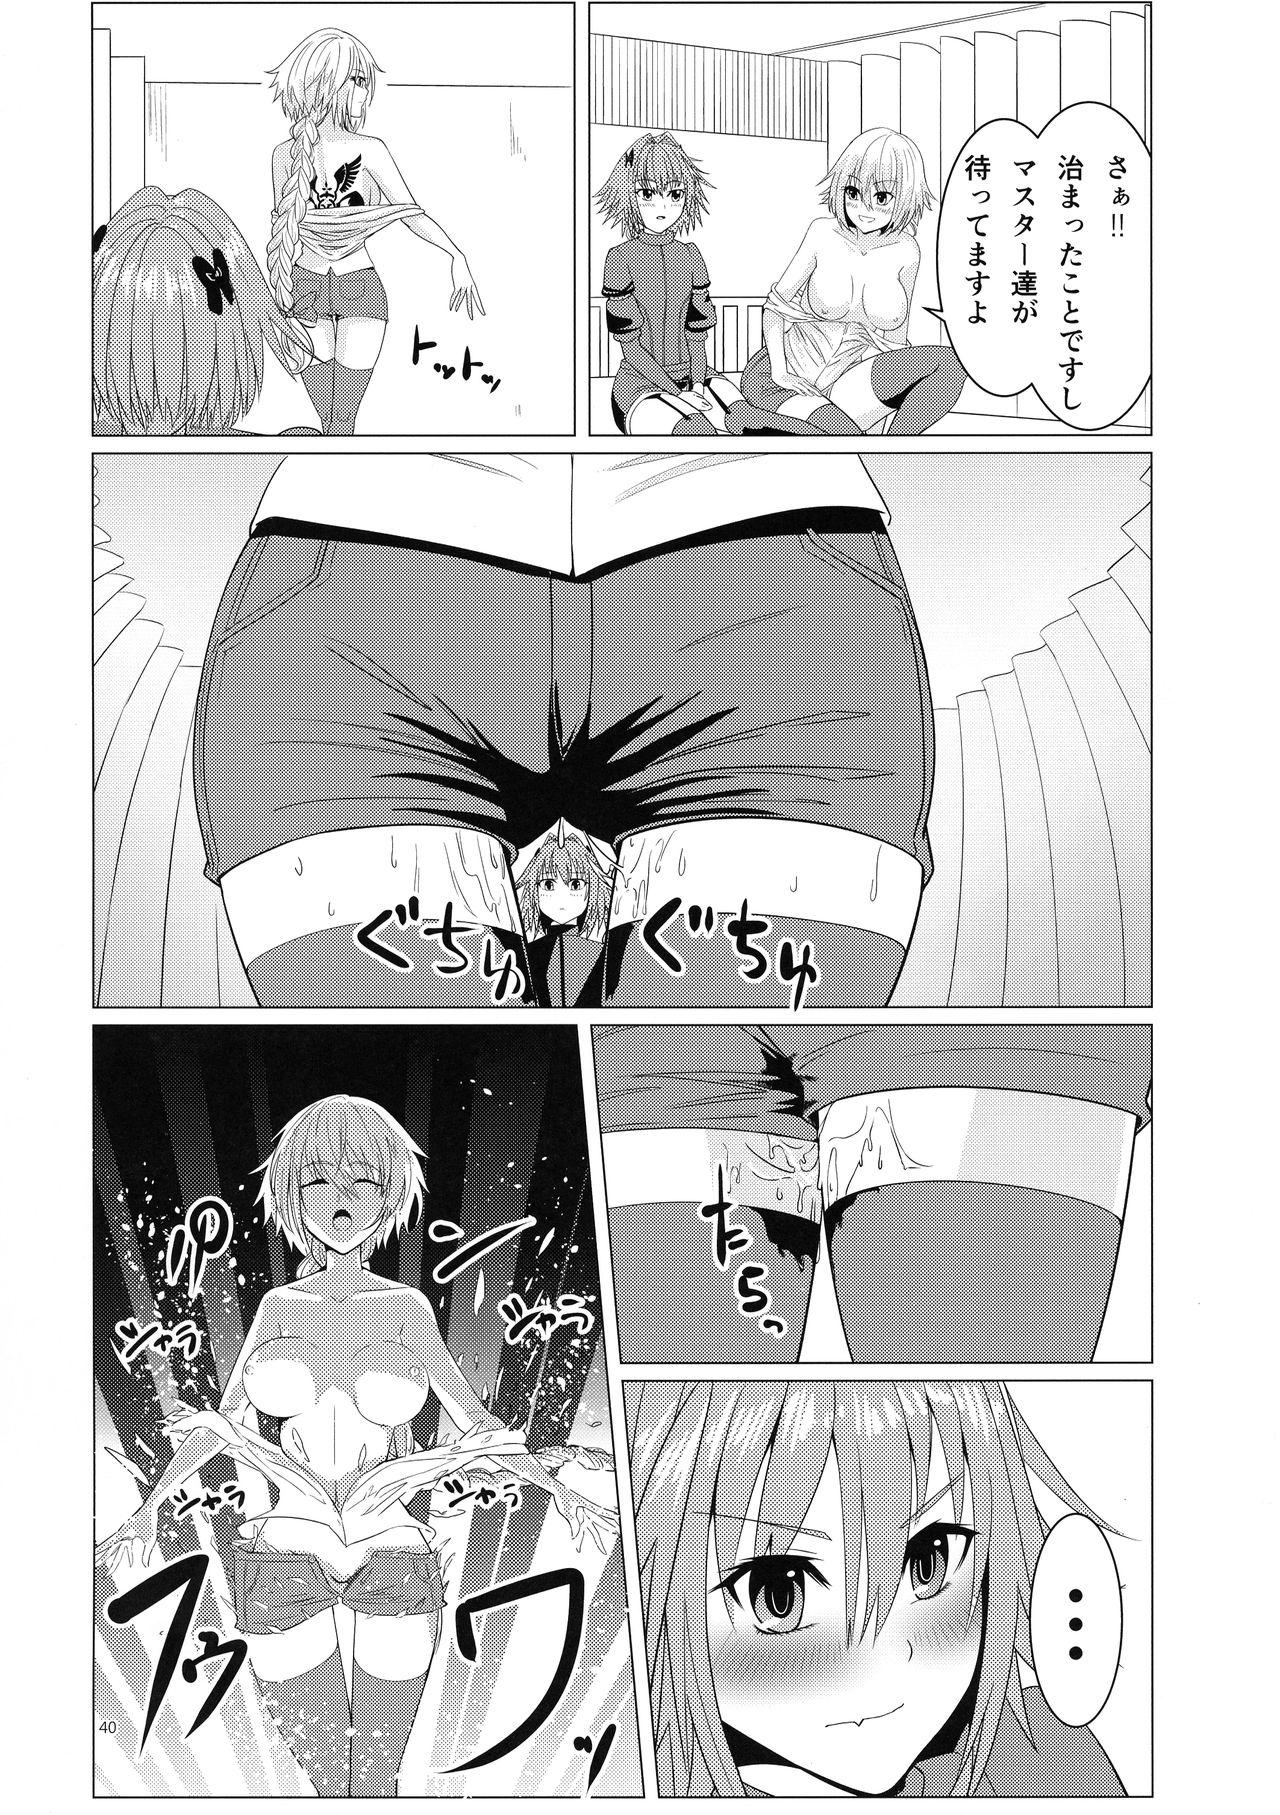 Matching Spirits - Jeanne and Astolfo have sex 36